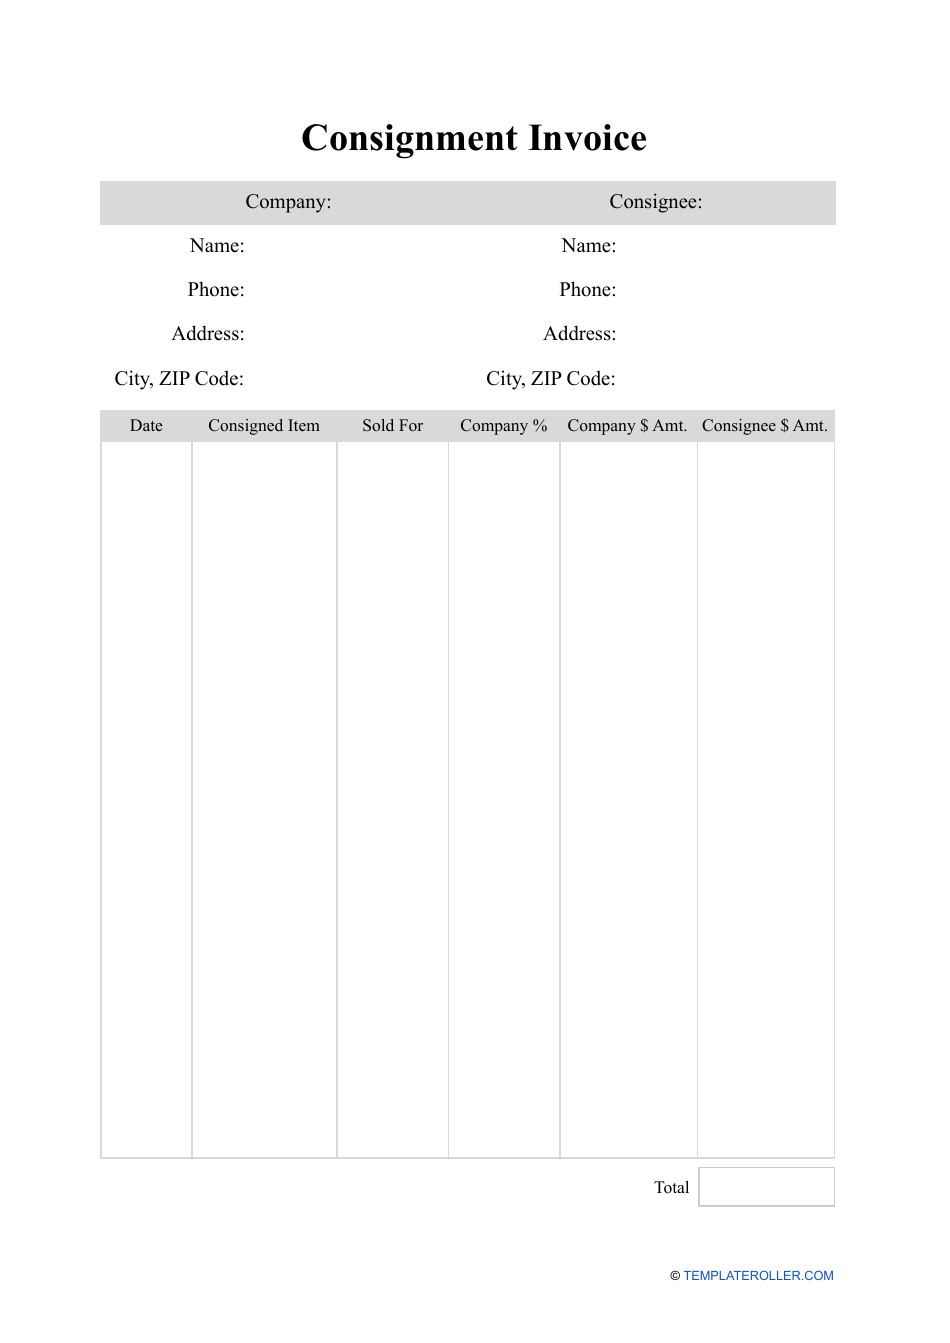 Consignment Invoice Template Fill Out Sign Online and Download PDF